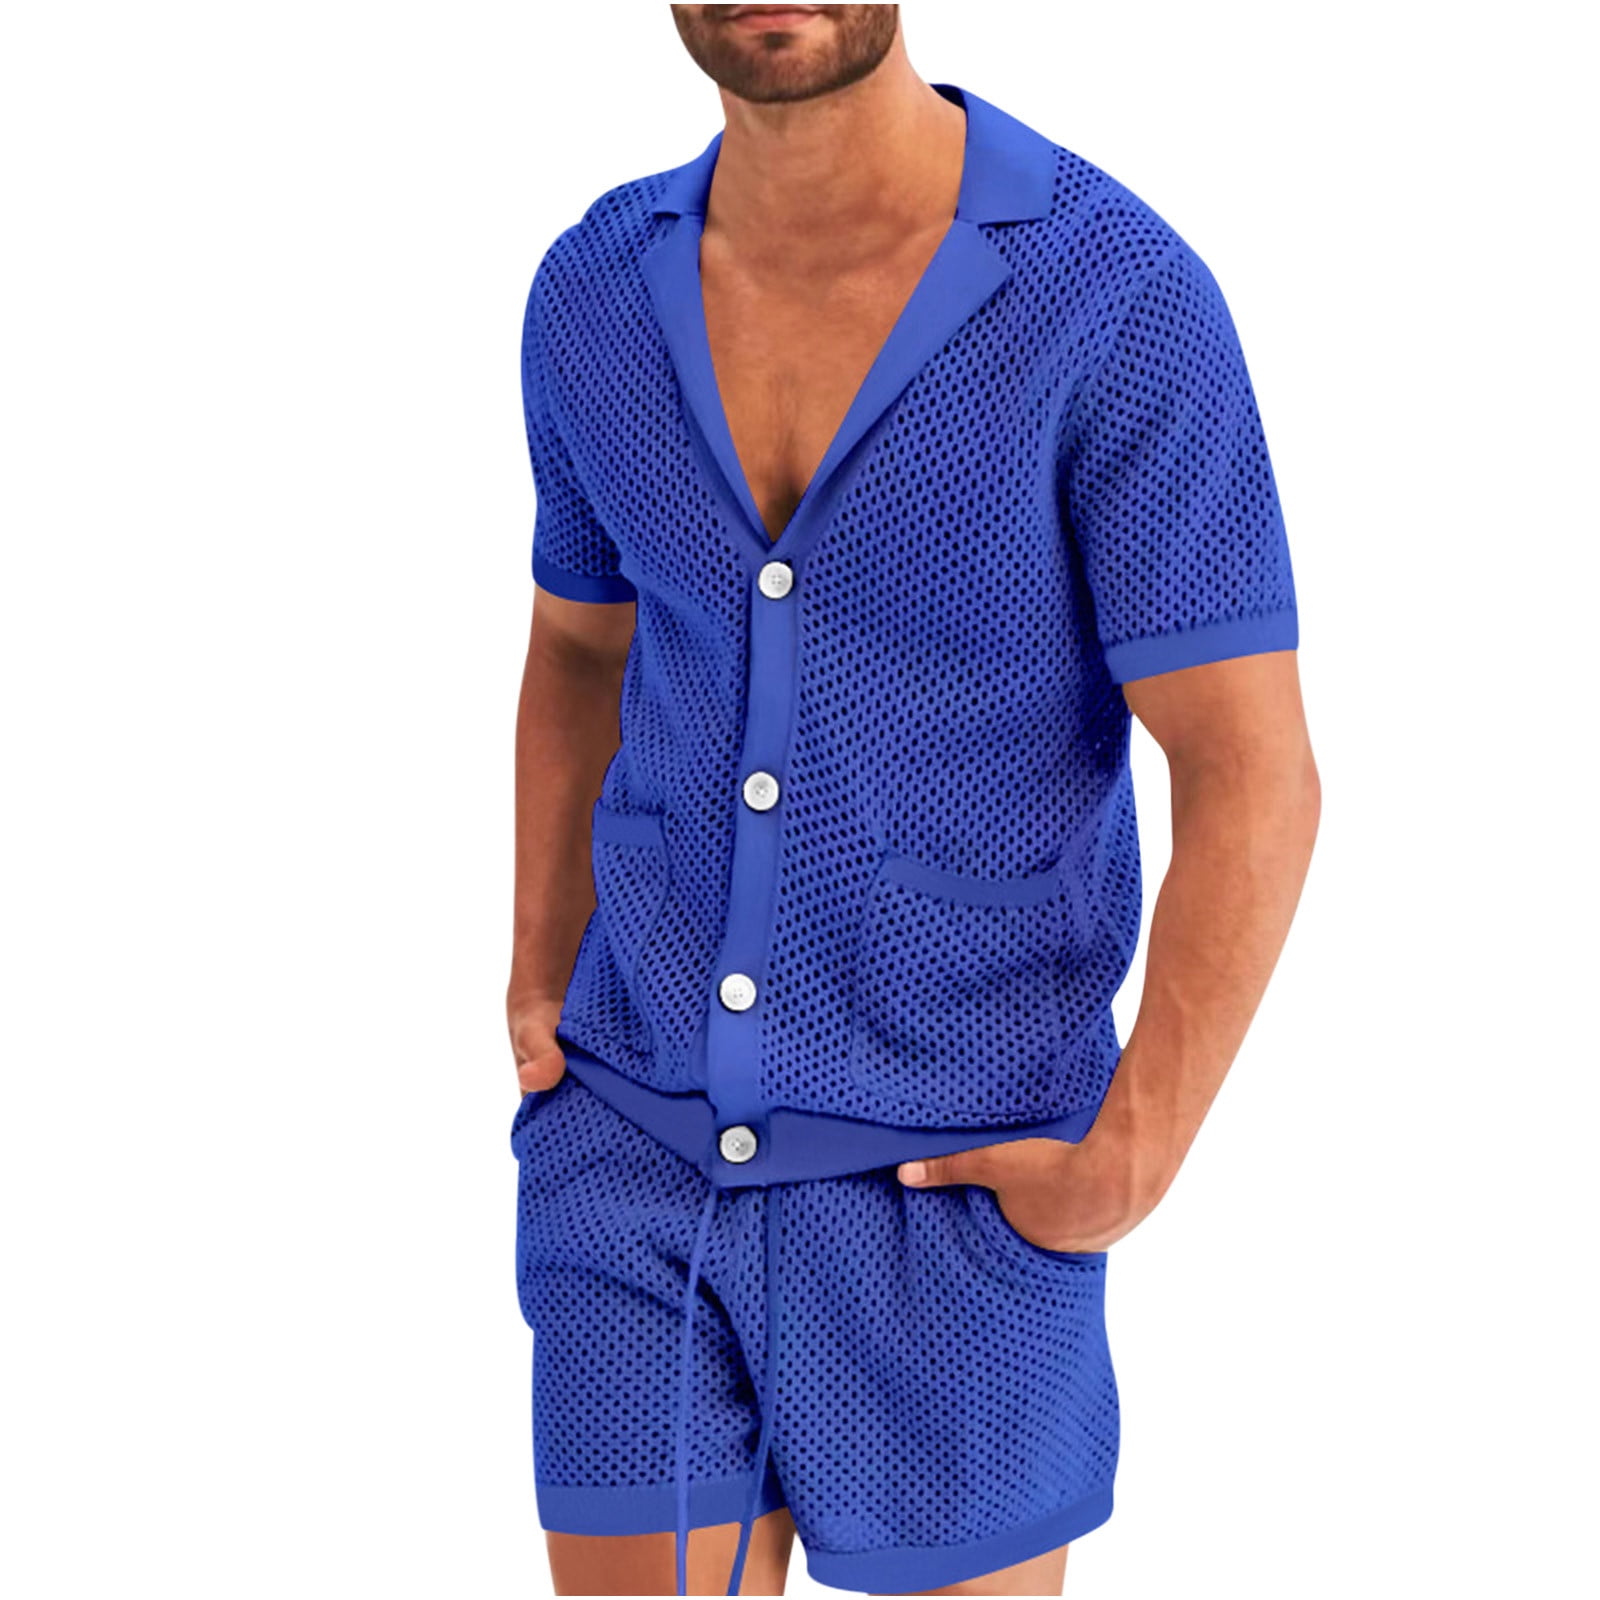 REORIAFEE Men's Set Summer Outfits Fashion Casual Sport Suit